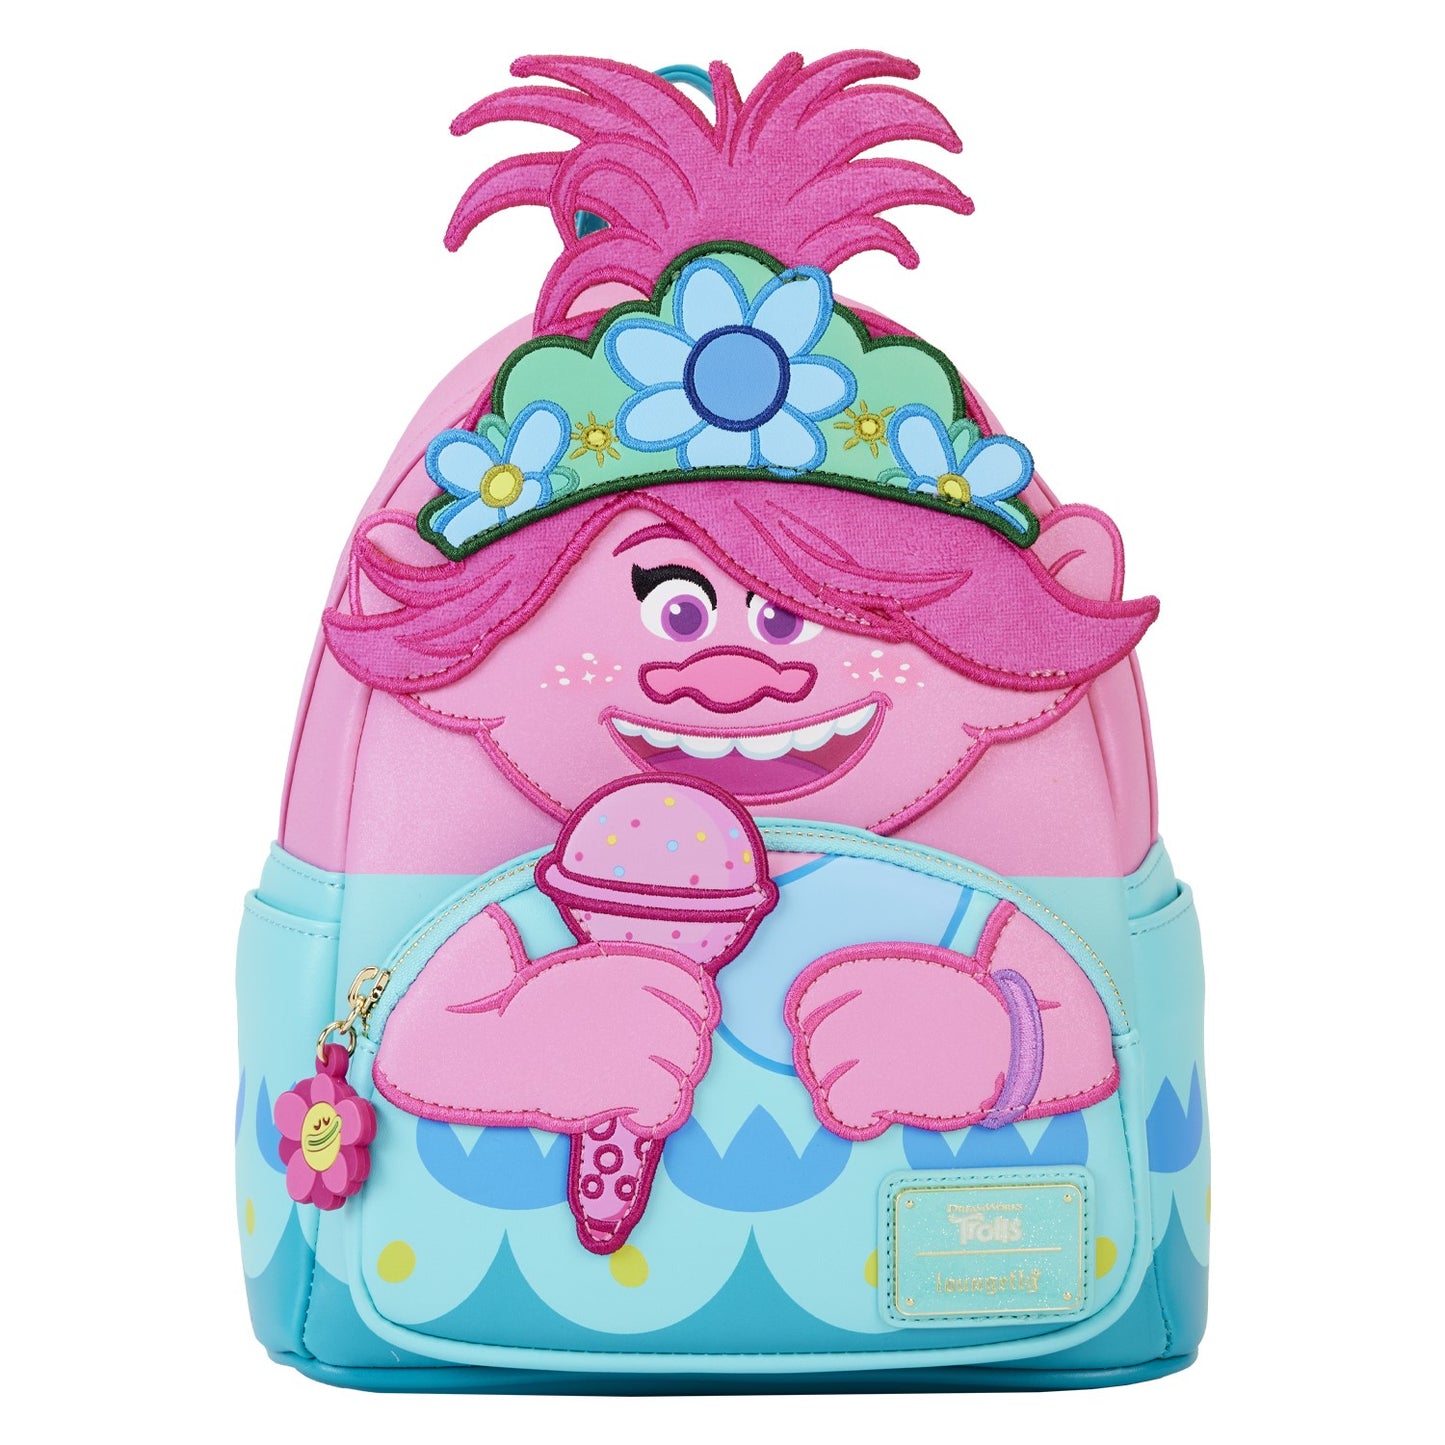 Loungefly Trolls "Poppy" AMC Exclusive Backpack